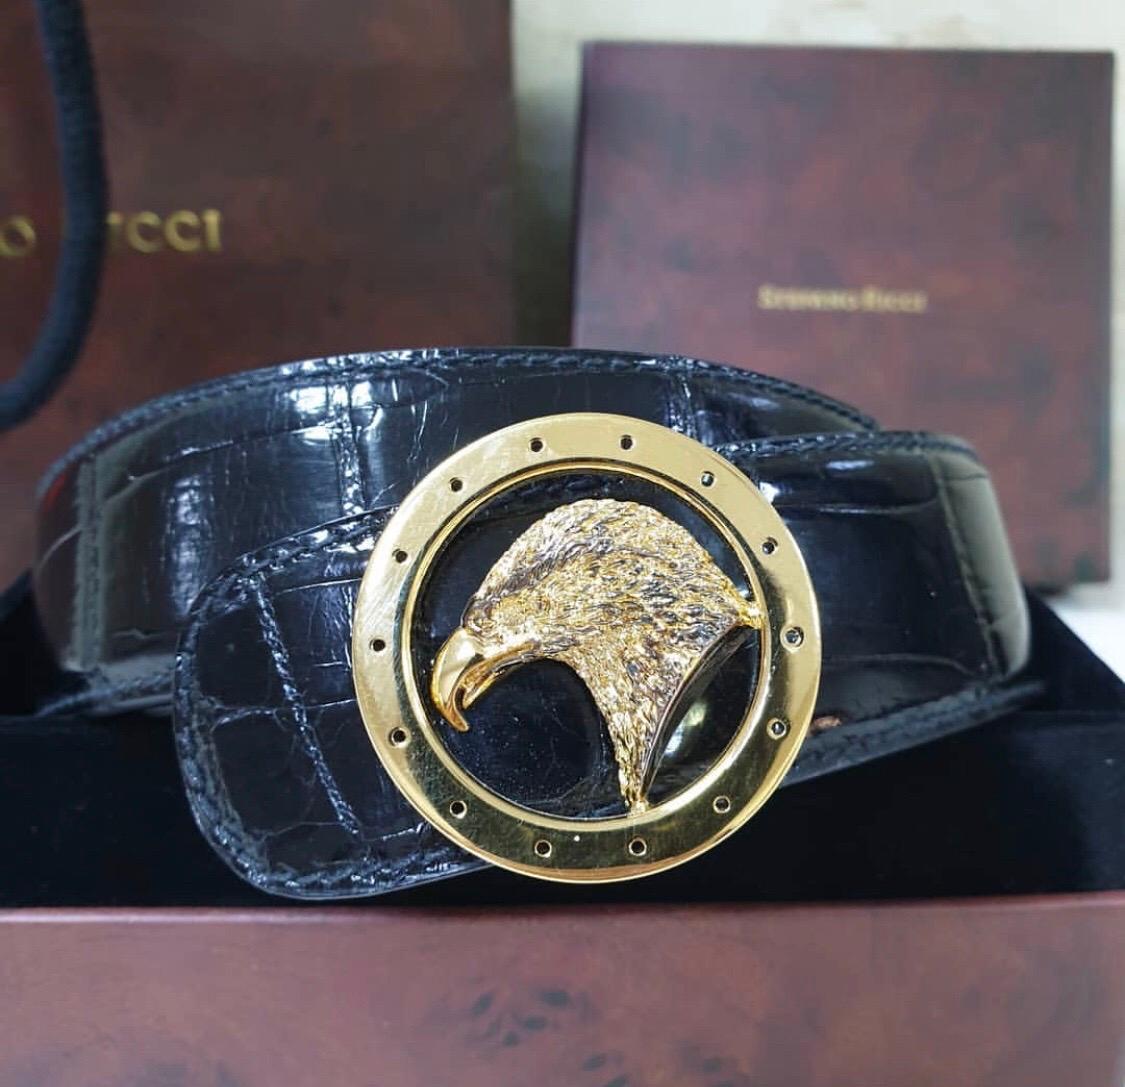 BRAND:  Stefano Ricci

SIZE:  Marked as 110 (44'') (40-44 US)

COLOR:  Black

MATERIAL:  100% Crocodile Leather

BUCKLE COLOR: Gold

New. Newer worn. Full set.

For buyers from EU we can provide shipping from Poland. Please demand if you need.